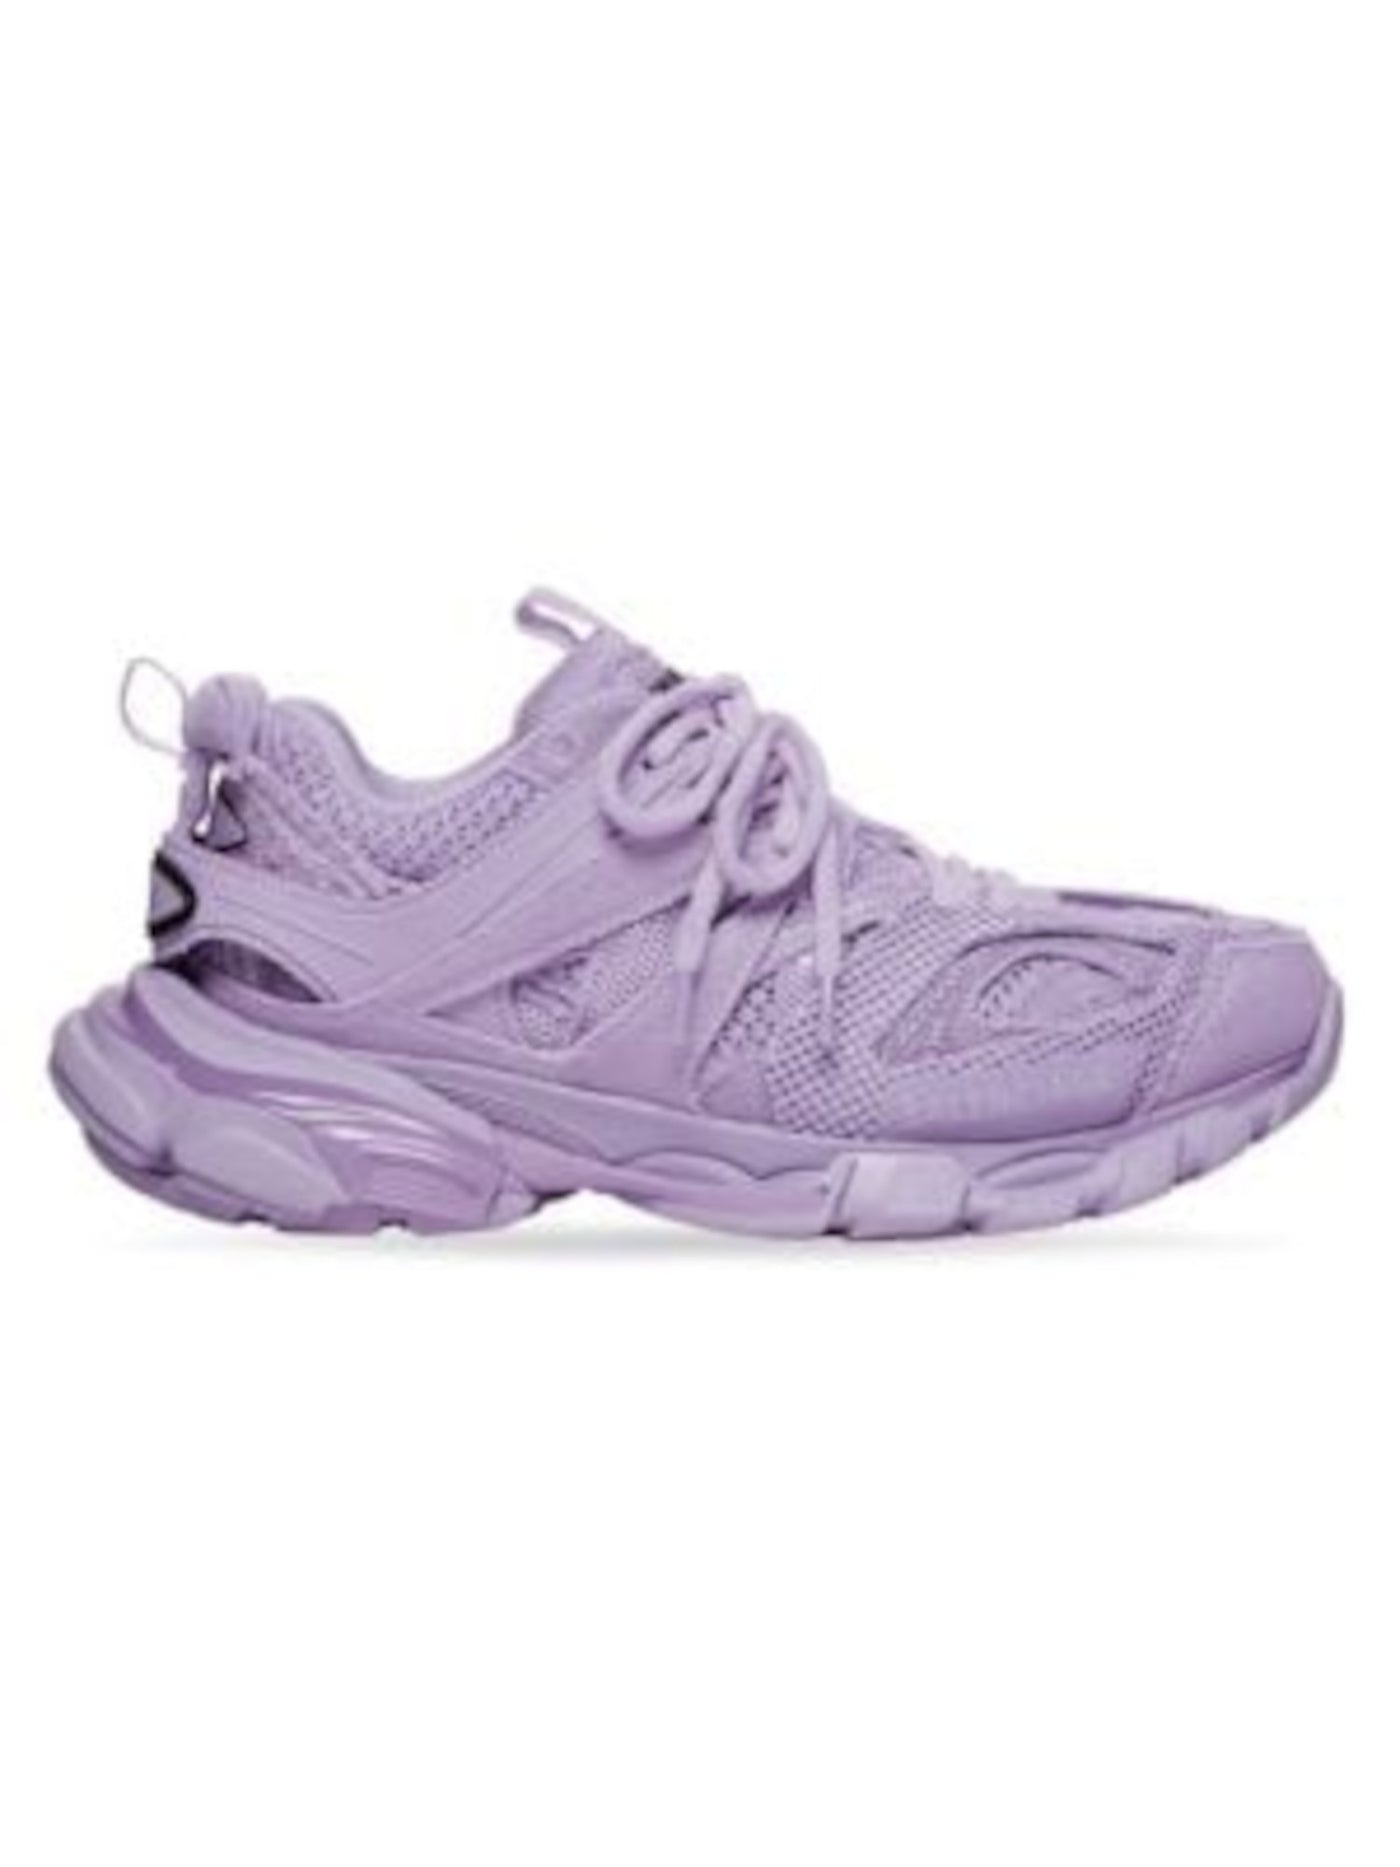 BALENCIAGA Womens Purple Comfort Logo Track Round Toe Lace-Up Athletic Sneakers Shoes 10